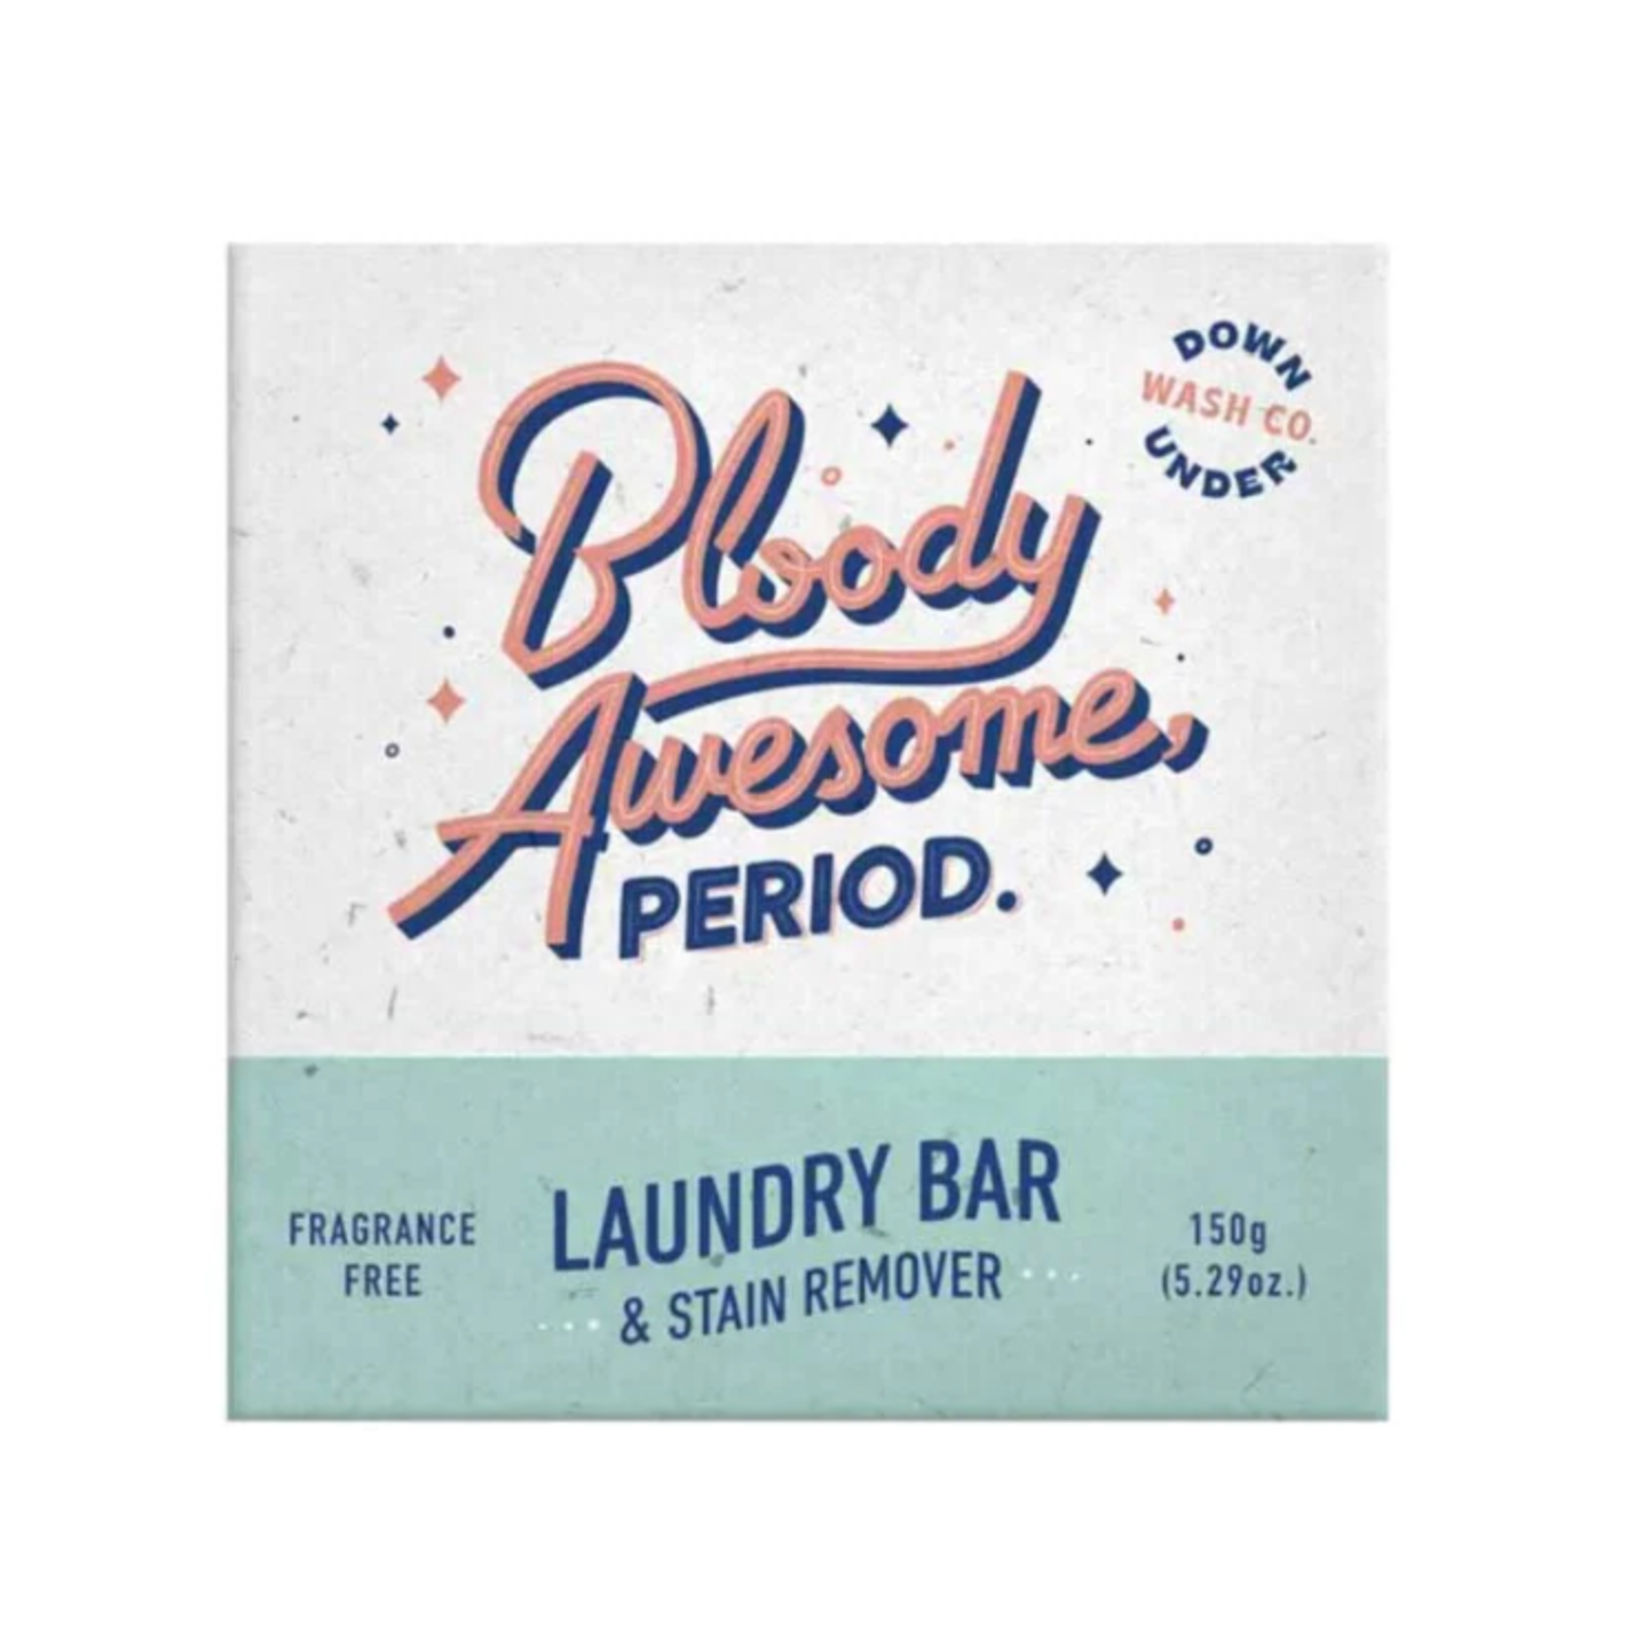 Down Under Wash Co. Bloody Awesome Laundry Bar 150g